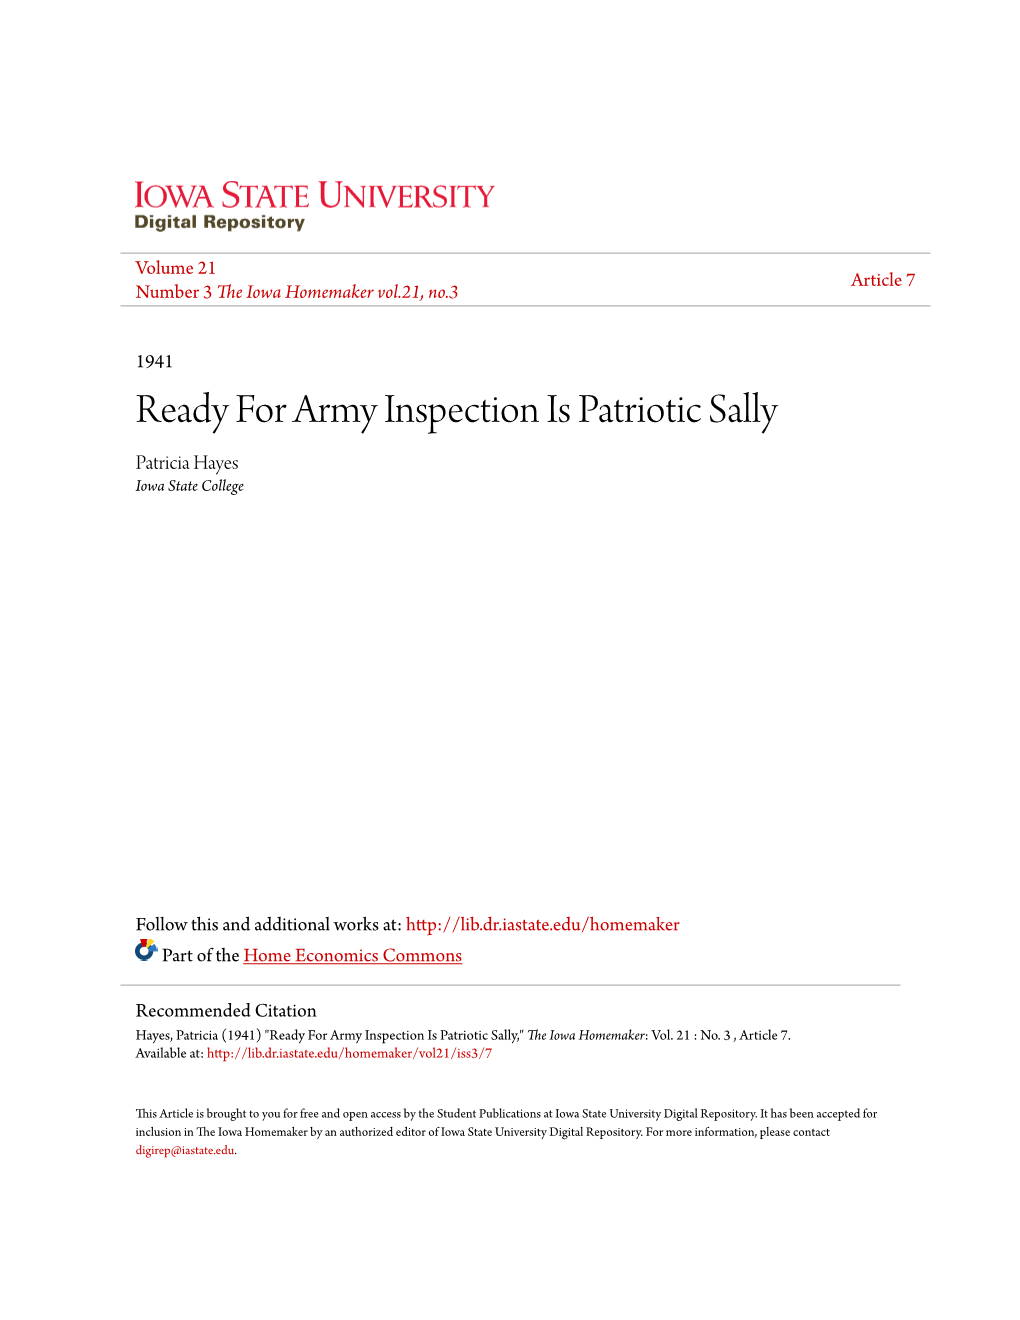 Ready for Army Inspection Is Patriotic Sally Patricia Hayes Iowa State College